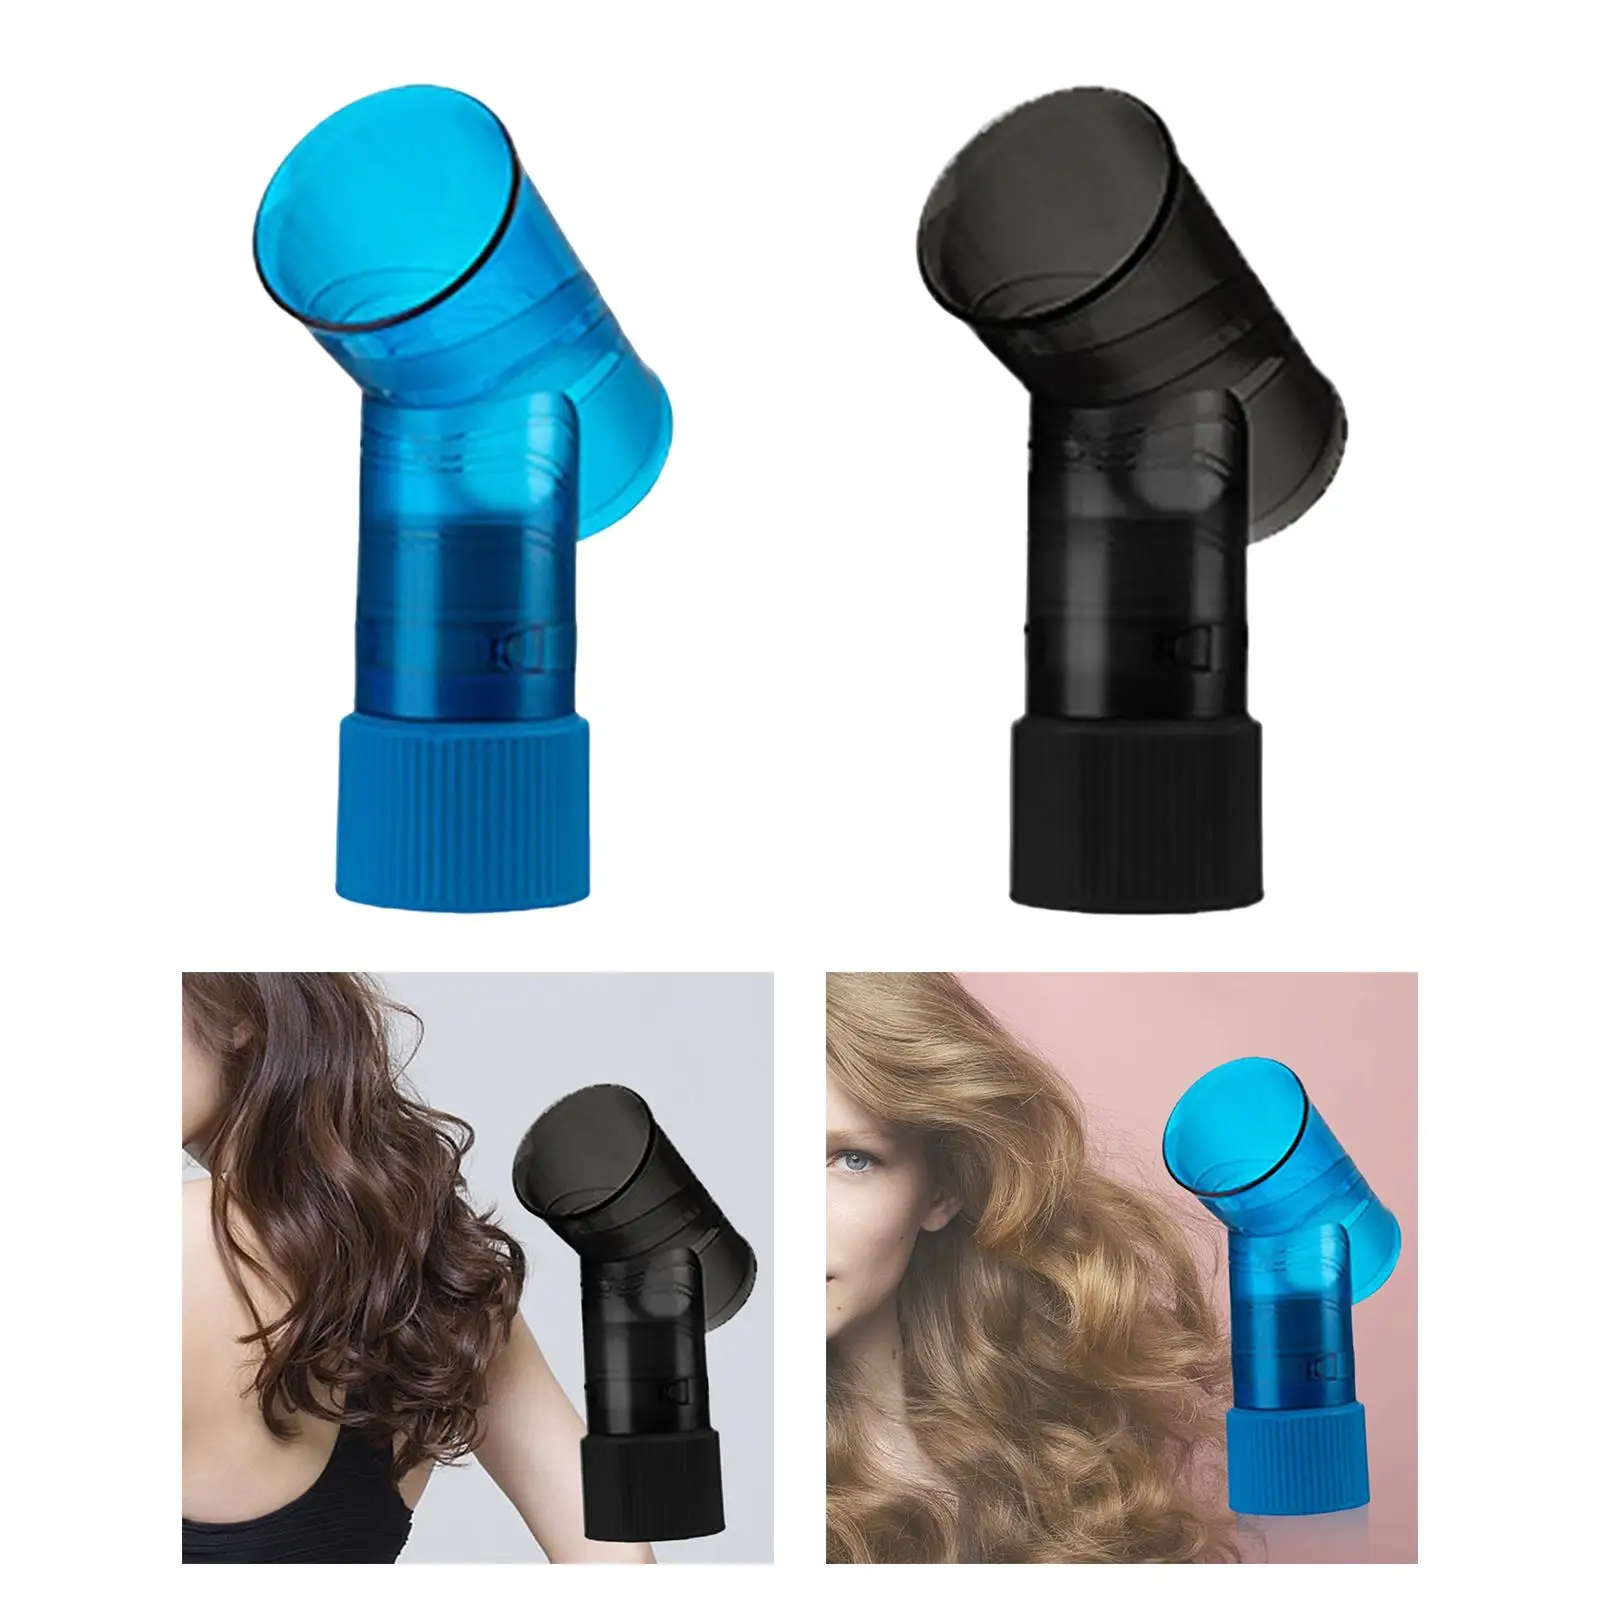 Hair Curl Diffuser Hair Dryer Attachment Salon Home Curly Blow Dryer Diffuser Hairdressing Styling Faster Easy to Operate Easier